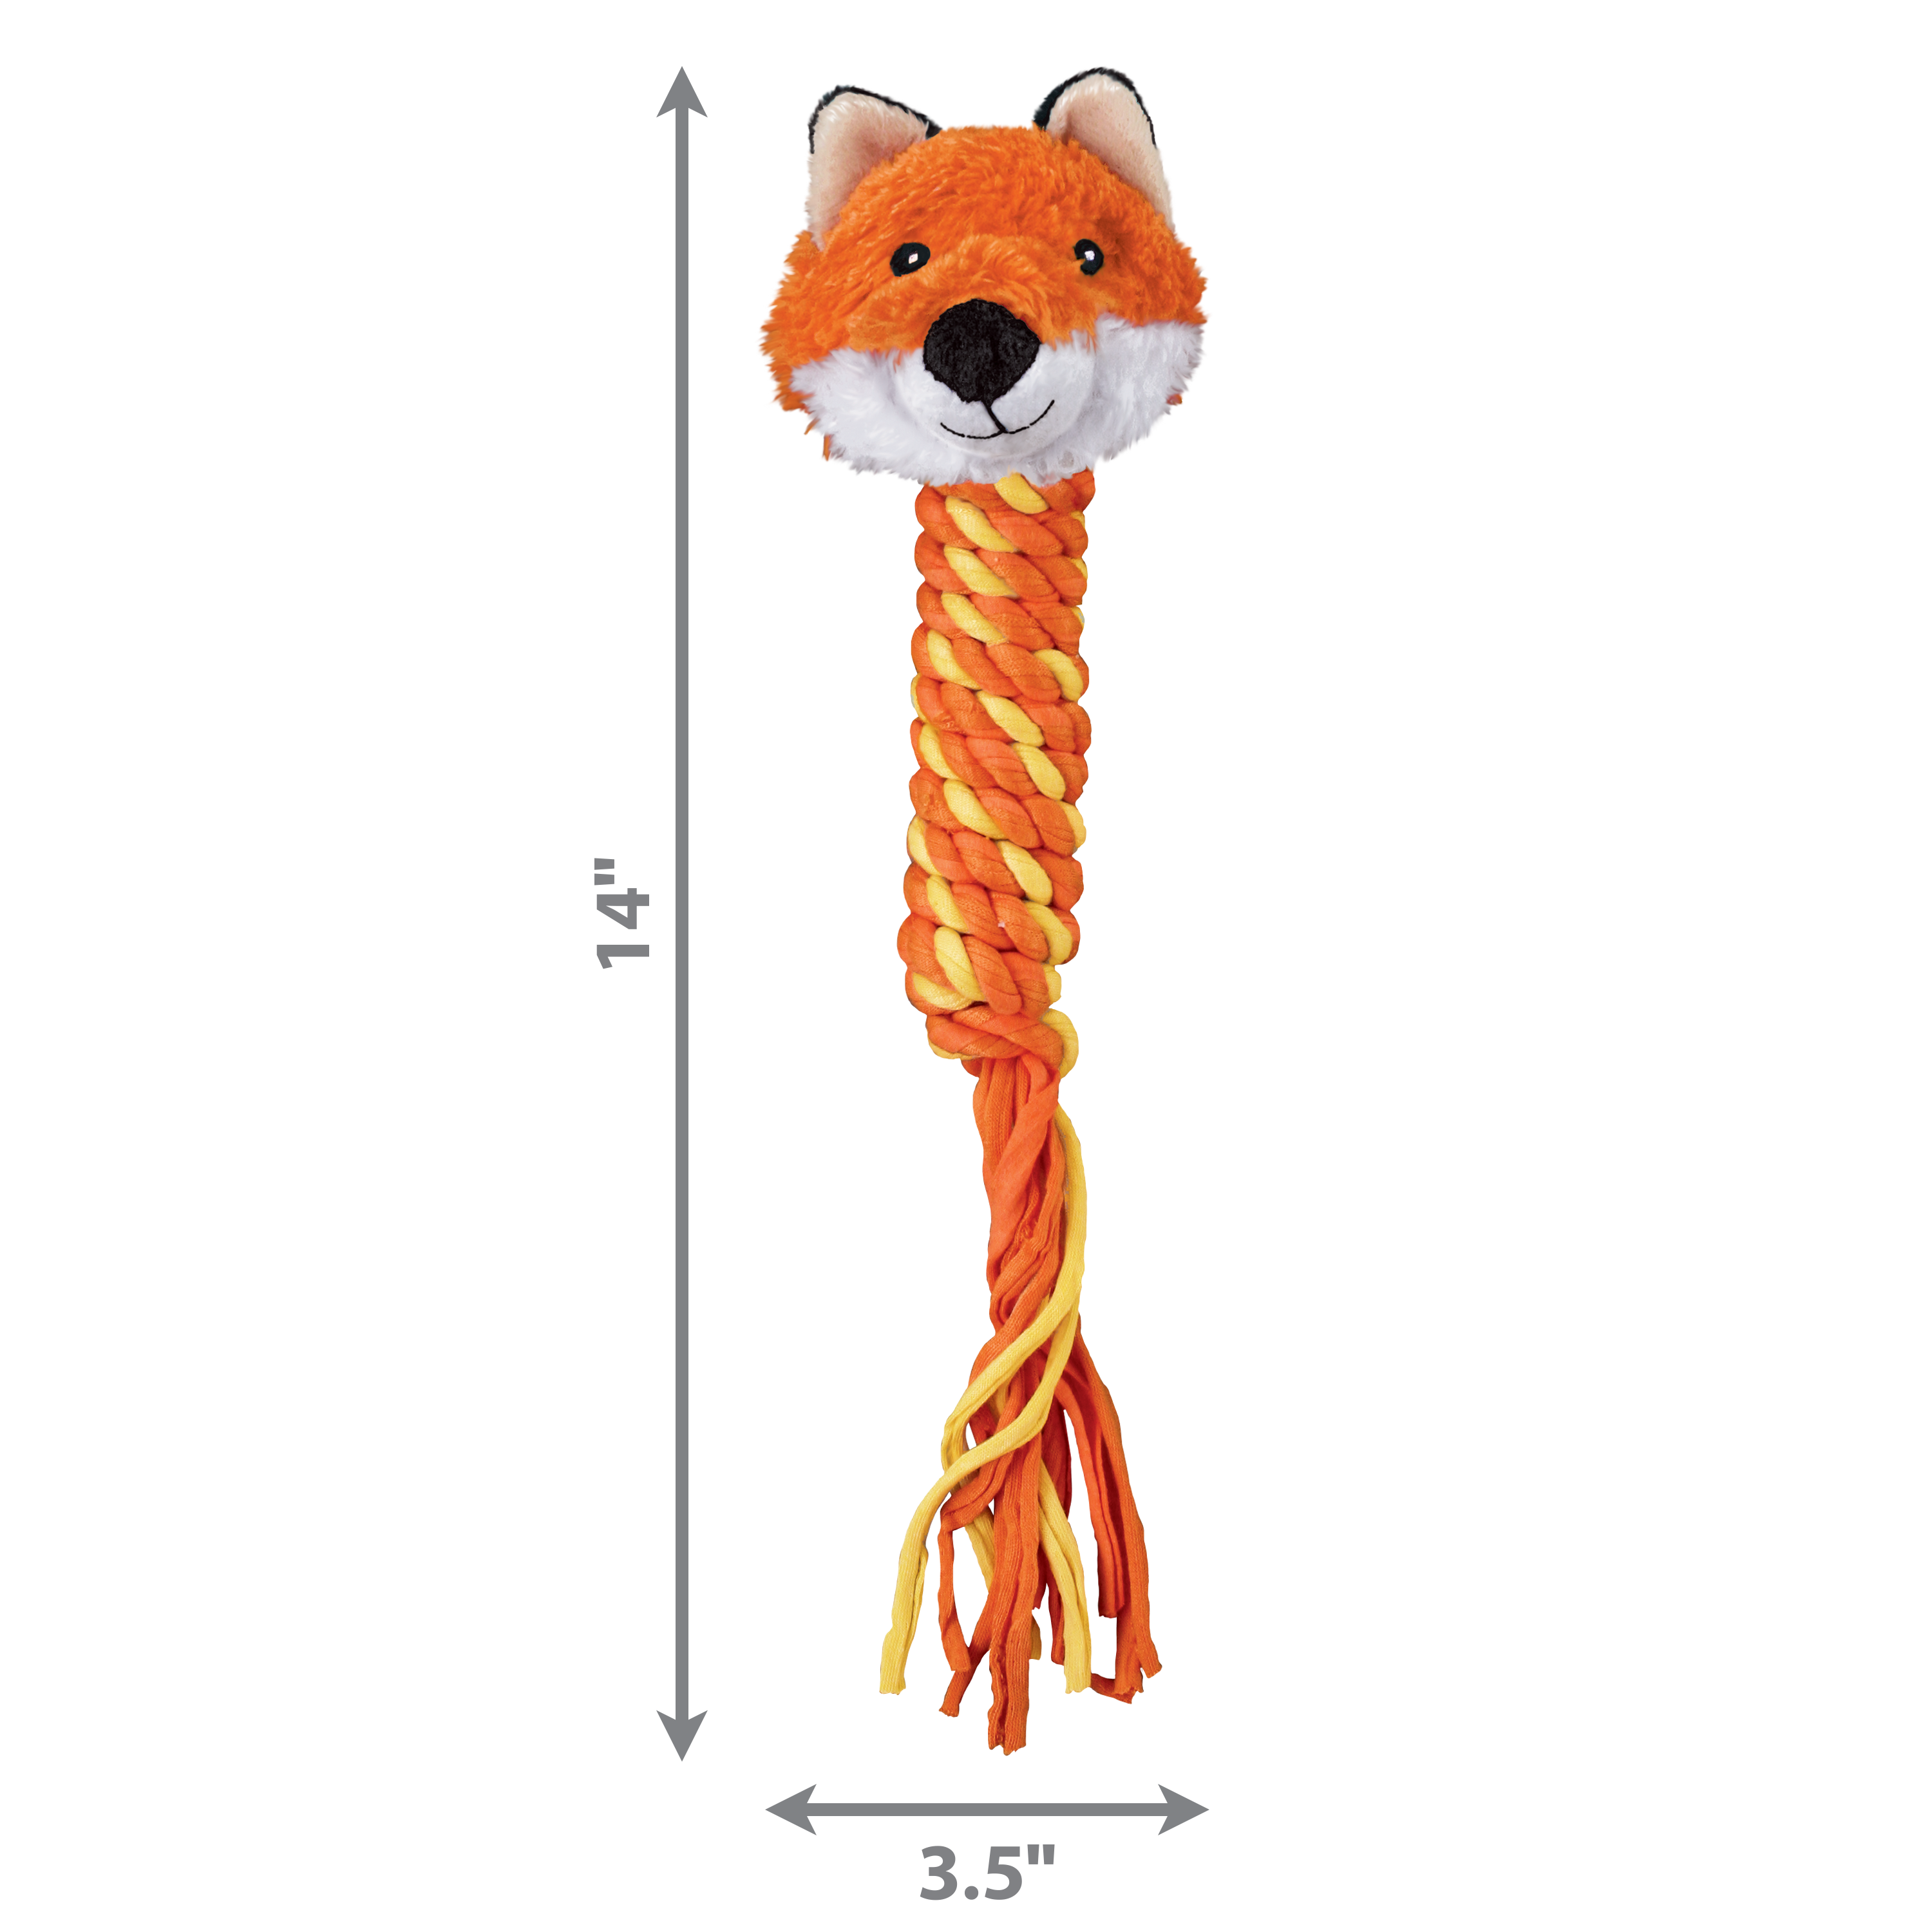 Winders Fox dimoffpack product image